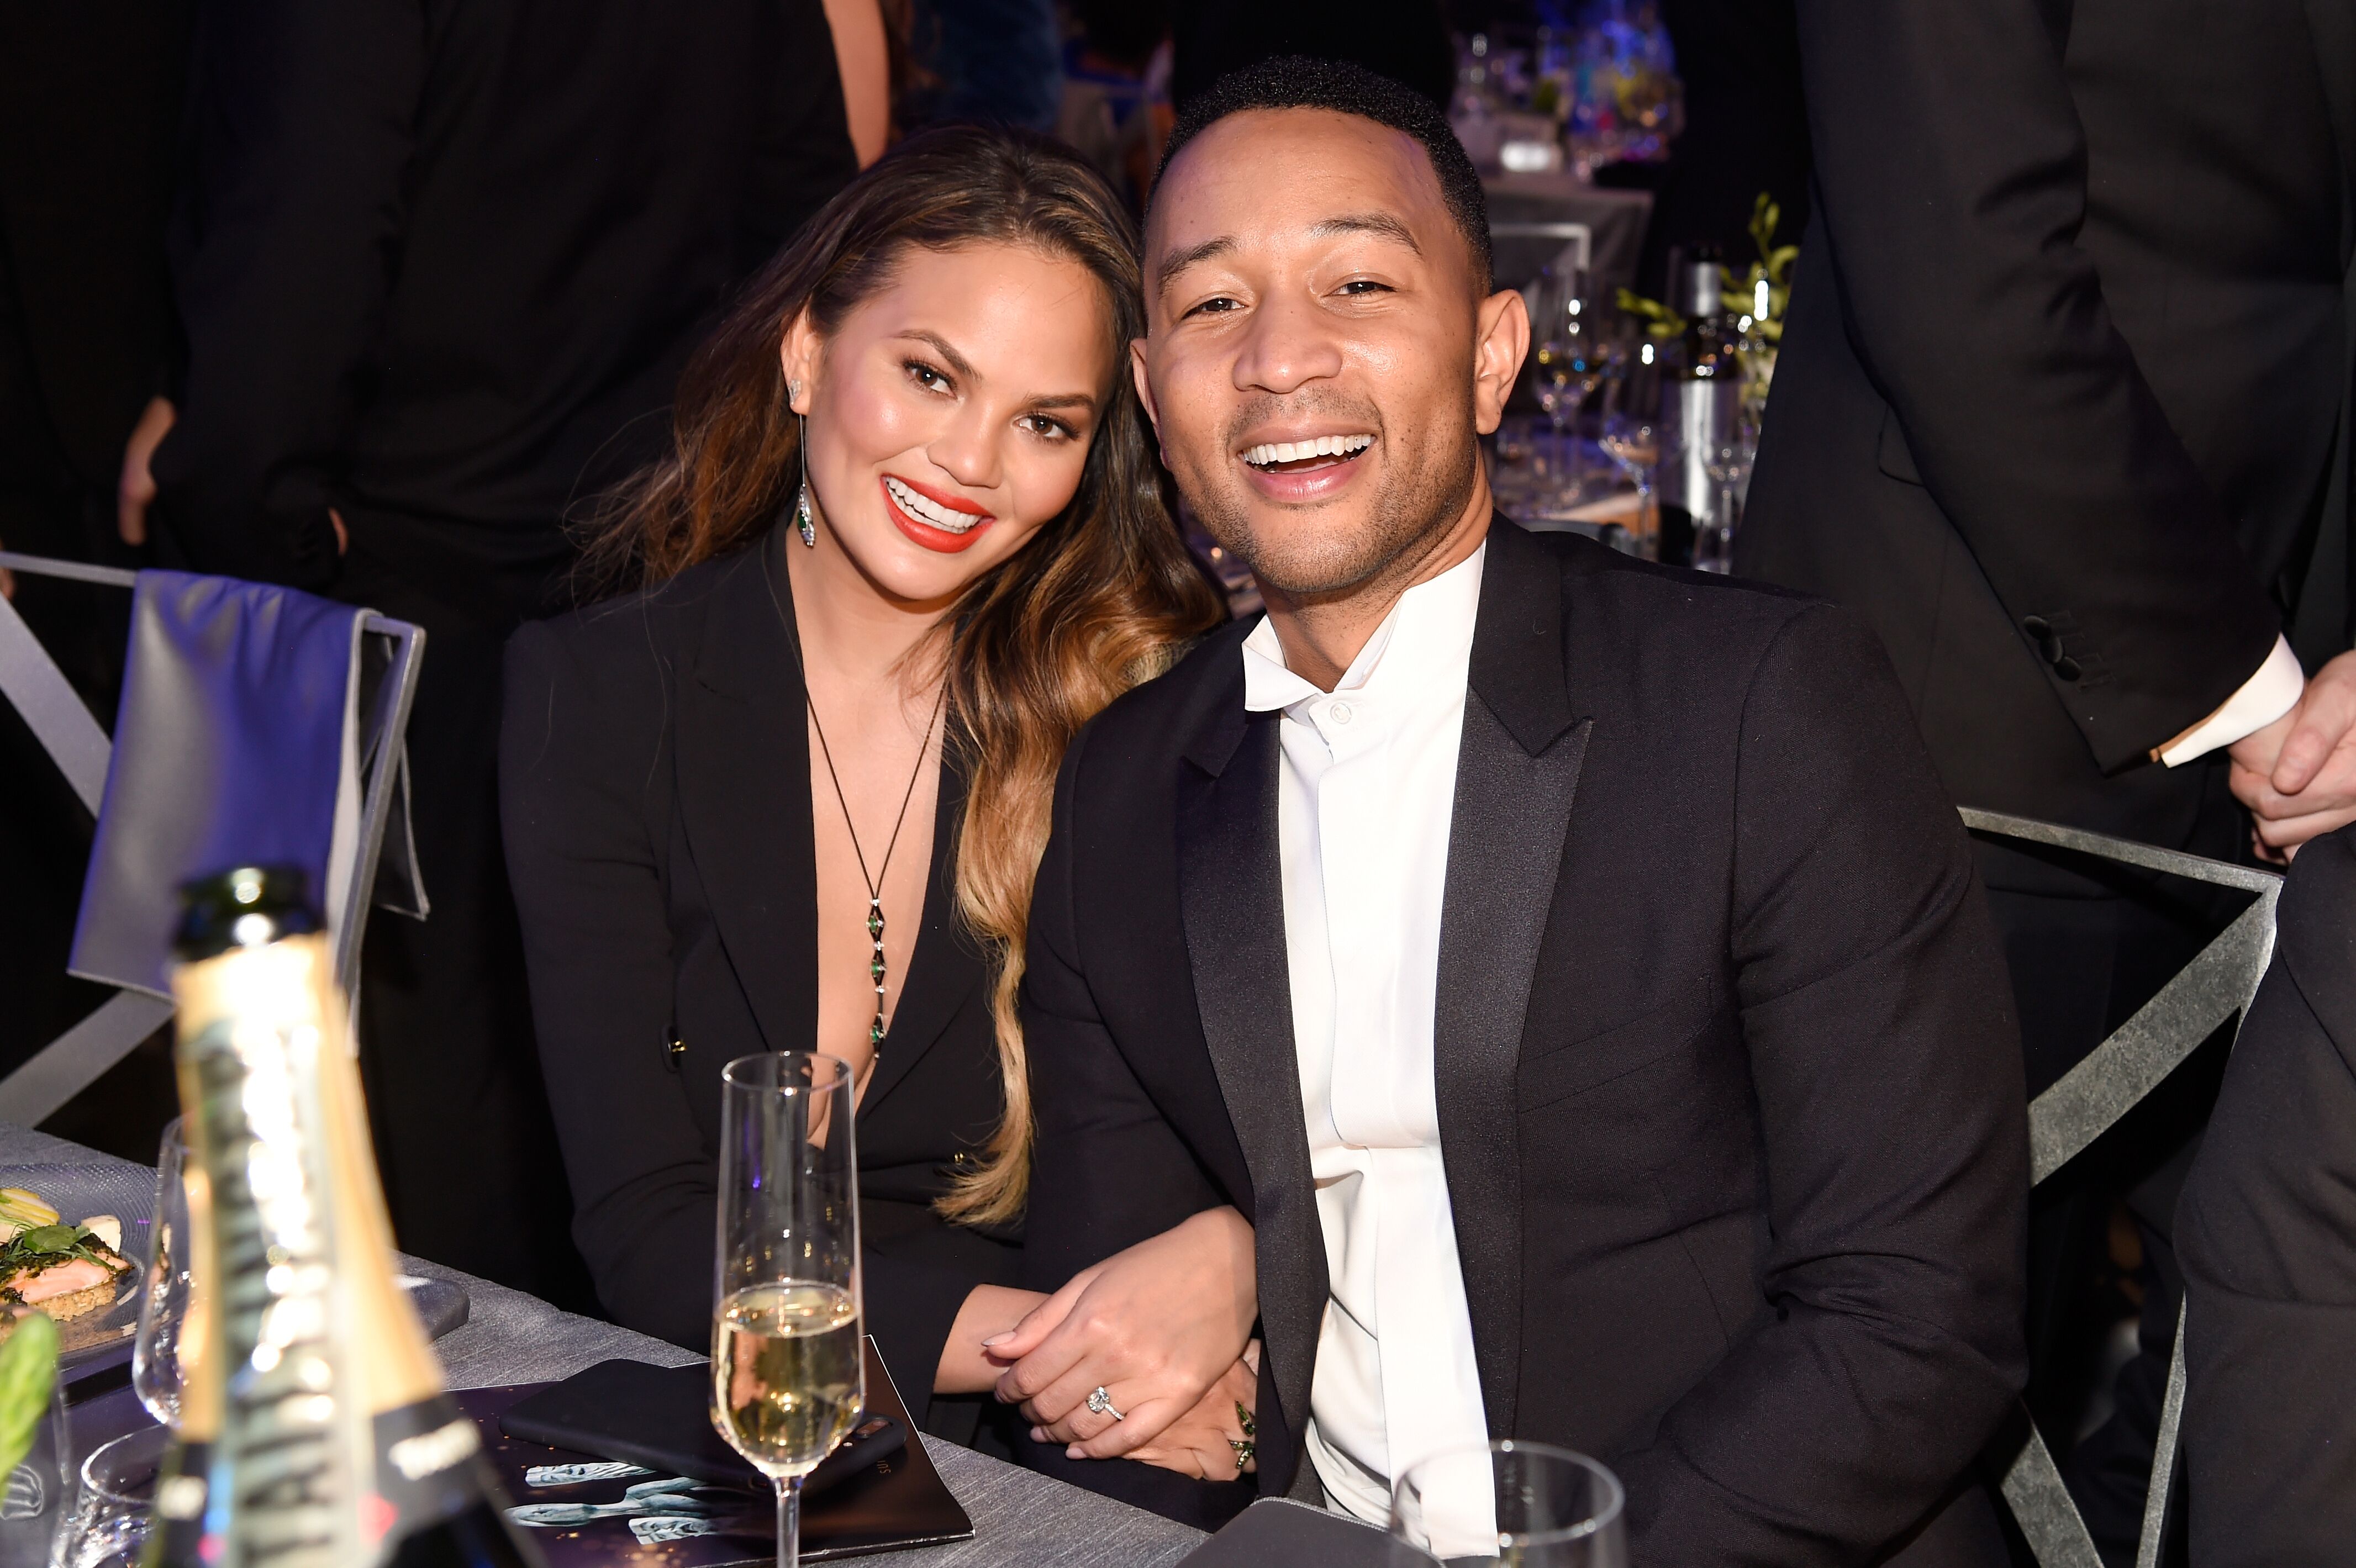 Chrissy Teigen and husband John Legend at the 23rd Annual Screen Actors Guild Awards/ Source: Getty Images